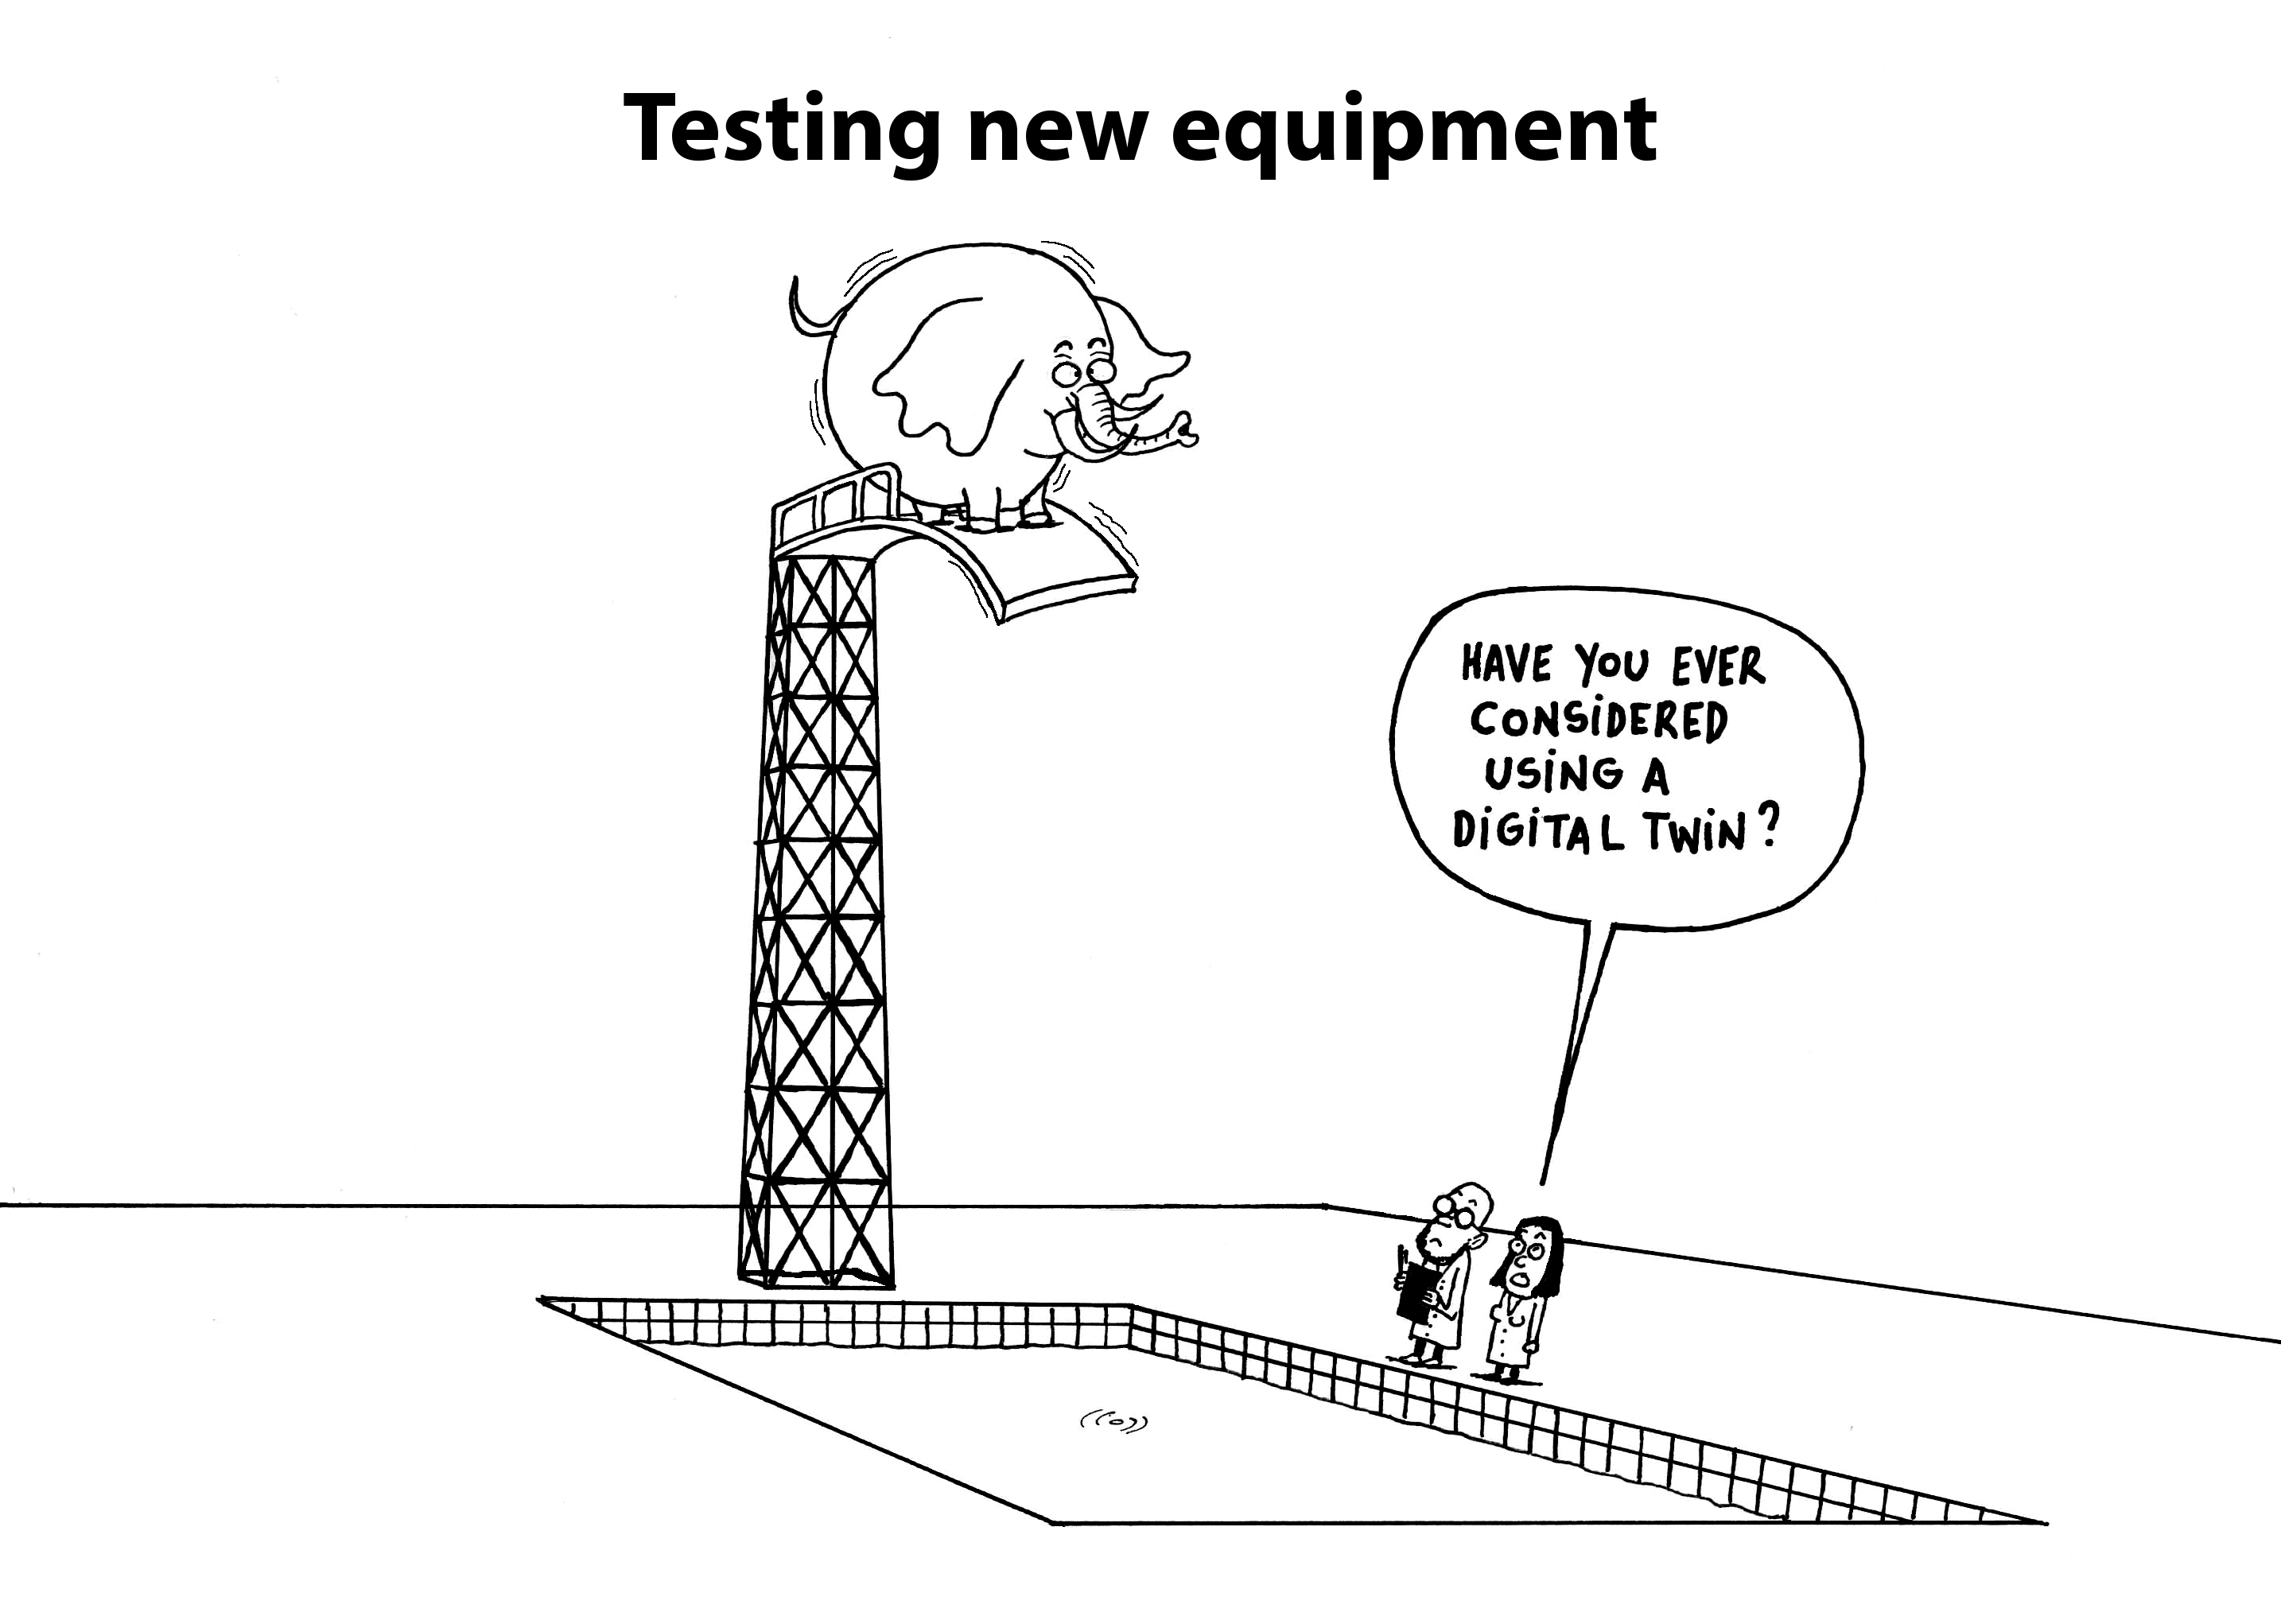 Quality engineer asking for digital twin when seeing swimming pool test using an elephant